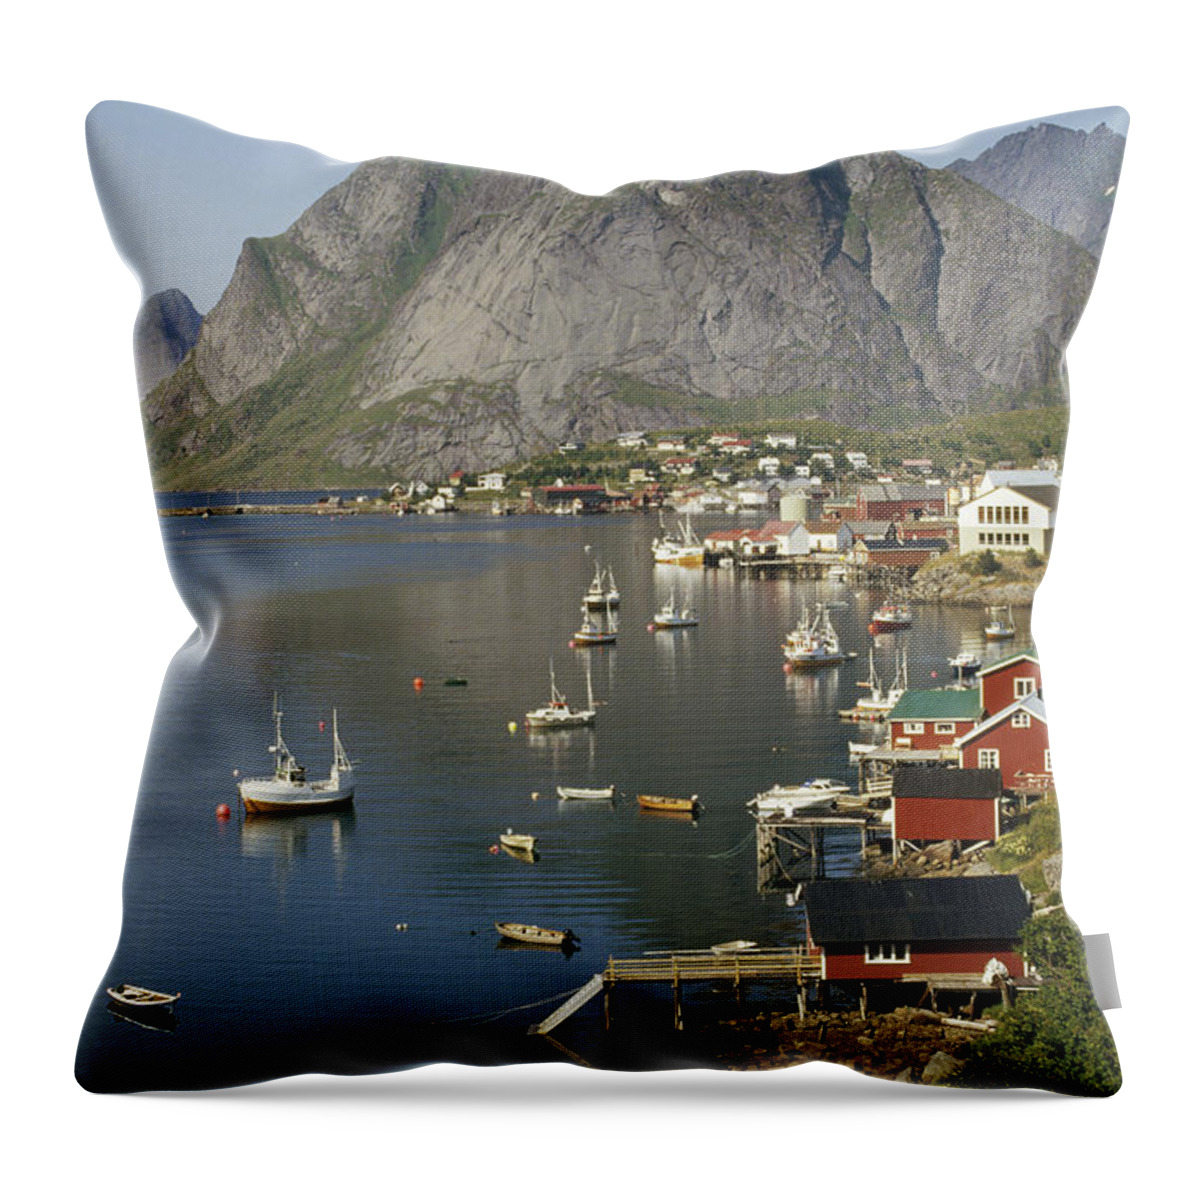 Feb0514 Throw Pillow featuring the photograph Norwegian Fjord And Traditional by Tui De Roy